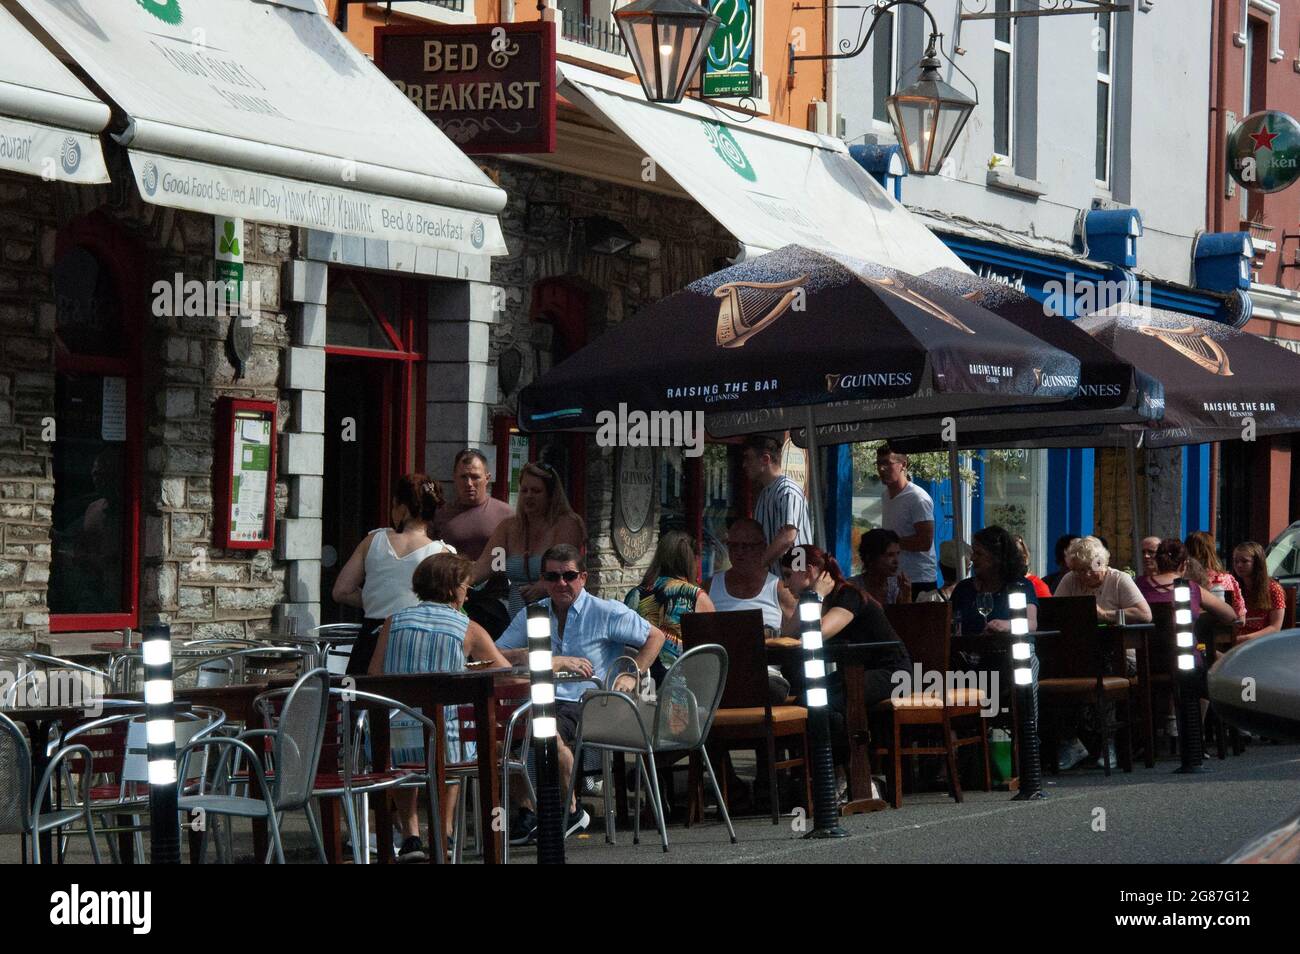 Kenmare Co. Kerry, Ireland, Saturday 17 July 2021; Weather conditions brought people out in their droves with Tempratures in some parts of the country, including Kenmare, hitting over 30 degrees Celcius. Many Bars and restraunt which are currently open under the revised guidelines ensured social distancing and sanitization protocols. Credit; ED/Alamy Live News Stock Photo